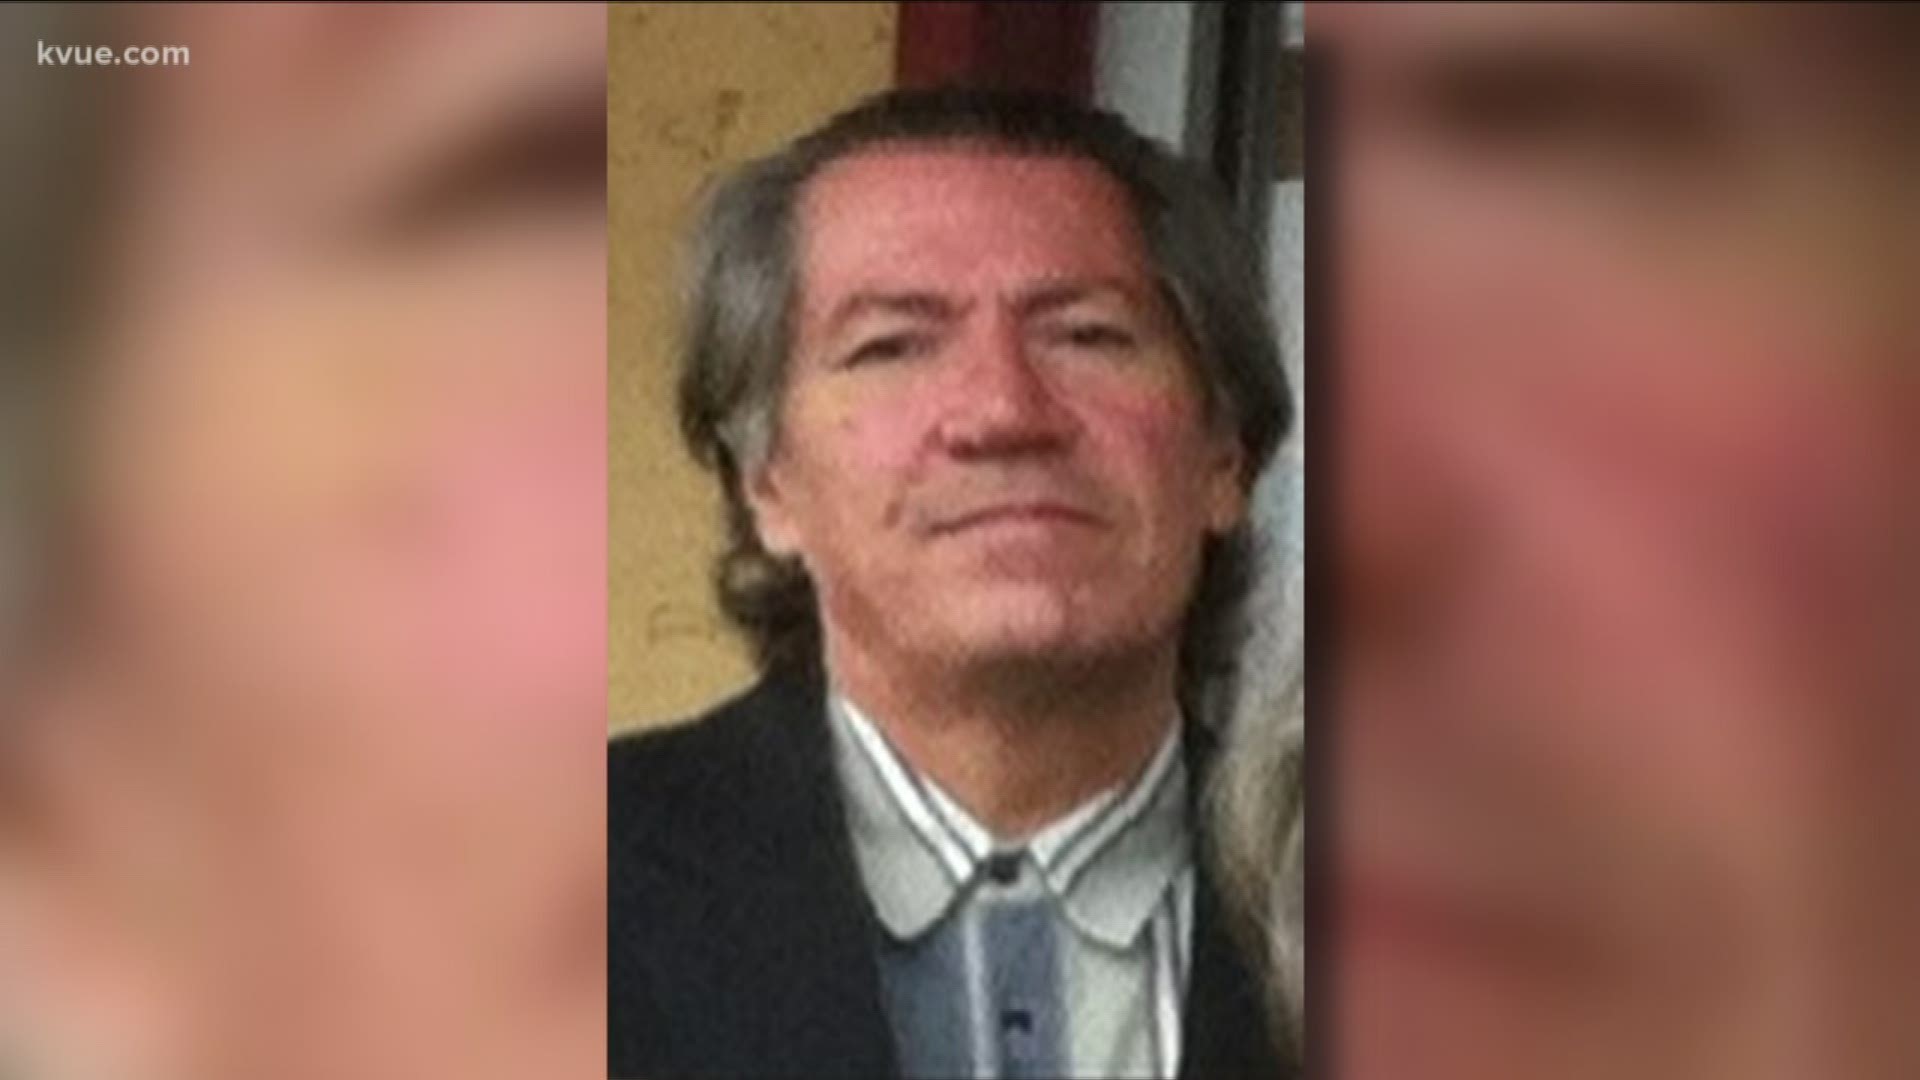 A bicyclist who was hit on RM 620 near Lohman's Crossing Road on Nov. 3 has died, his family has confirmed to KVUE.

The family of 67-year-old David Case said was biking to work to Randalls that morning when he was hit.
STORY: http://www.kvue.com/news/cri